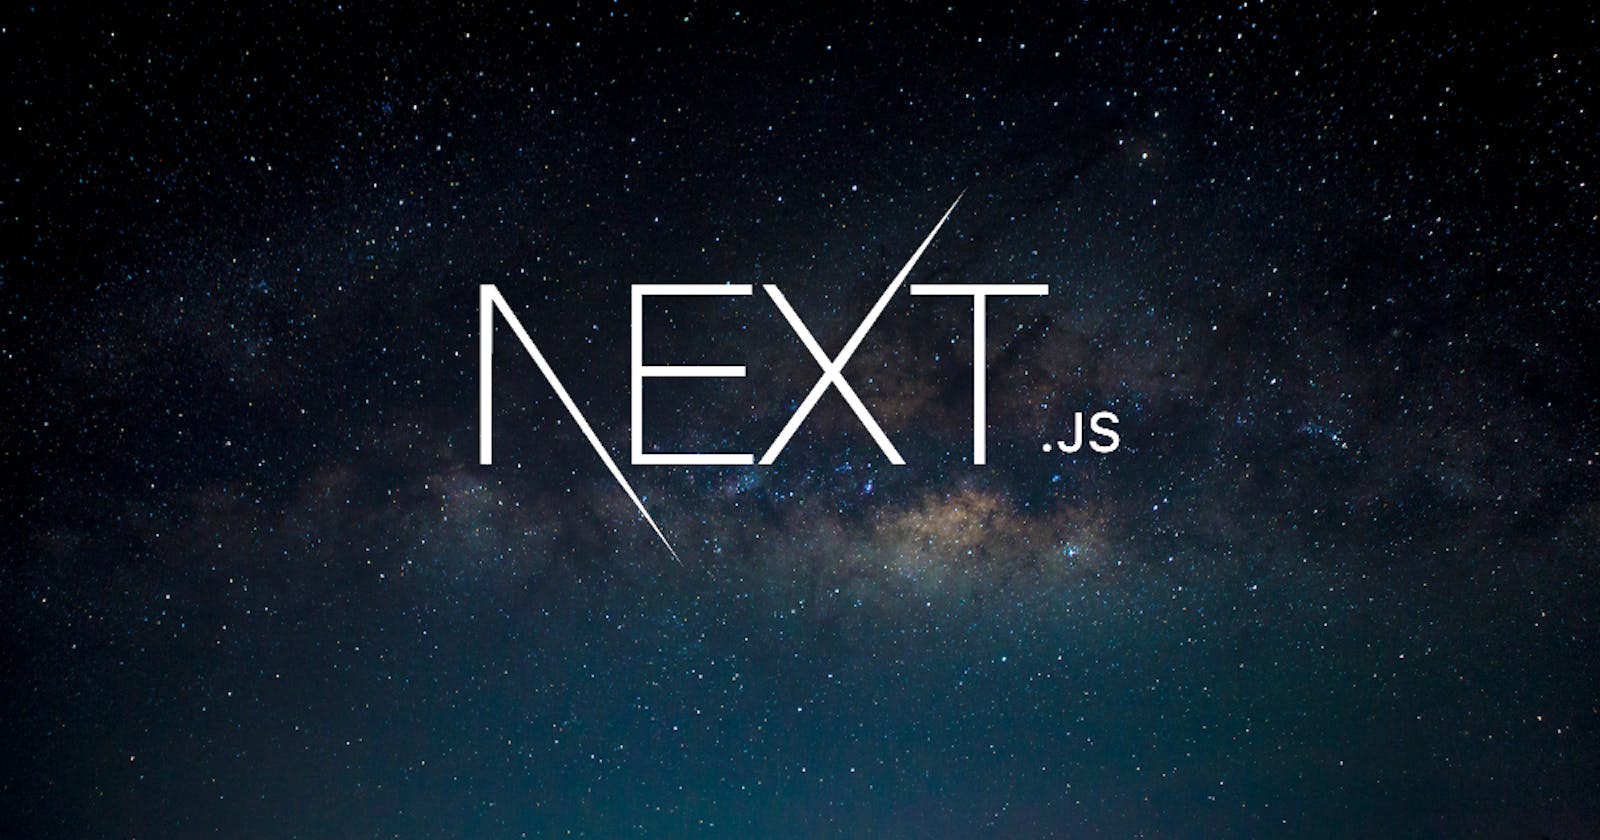 Issues that you may face when working with Next.js the first time